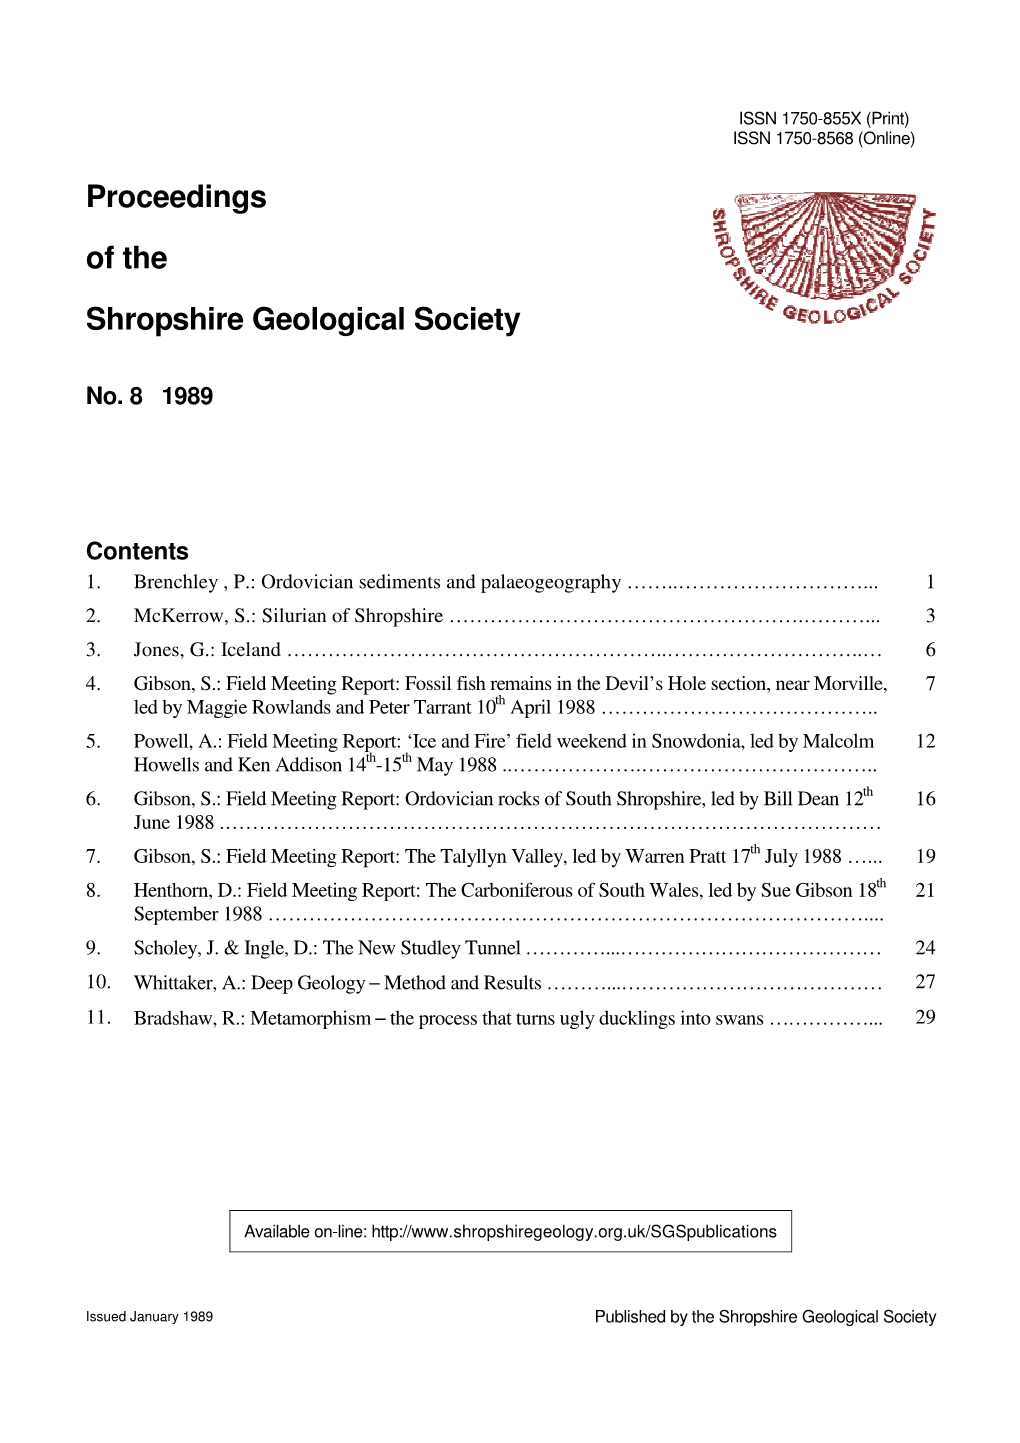 Proceedings of the Shropshire Geological Society , 8, 1─2